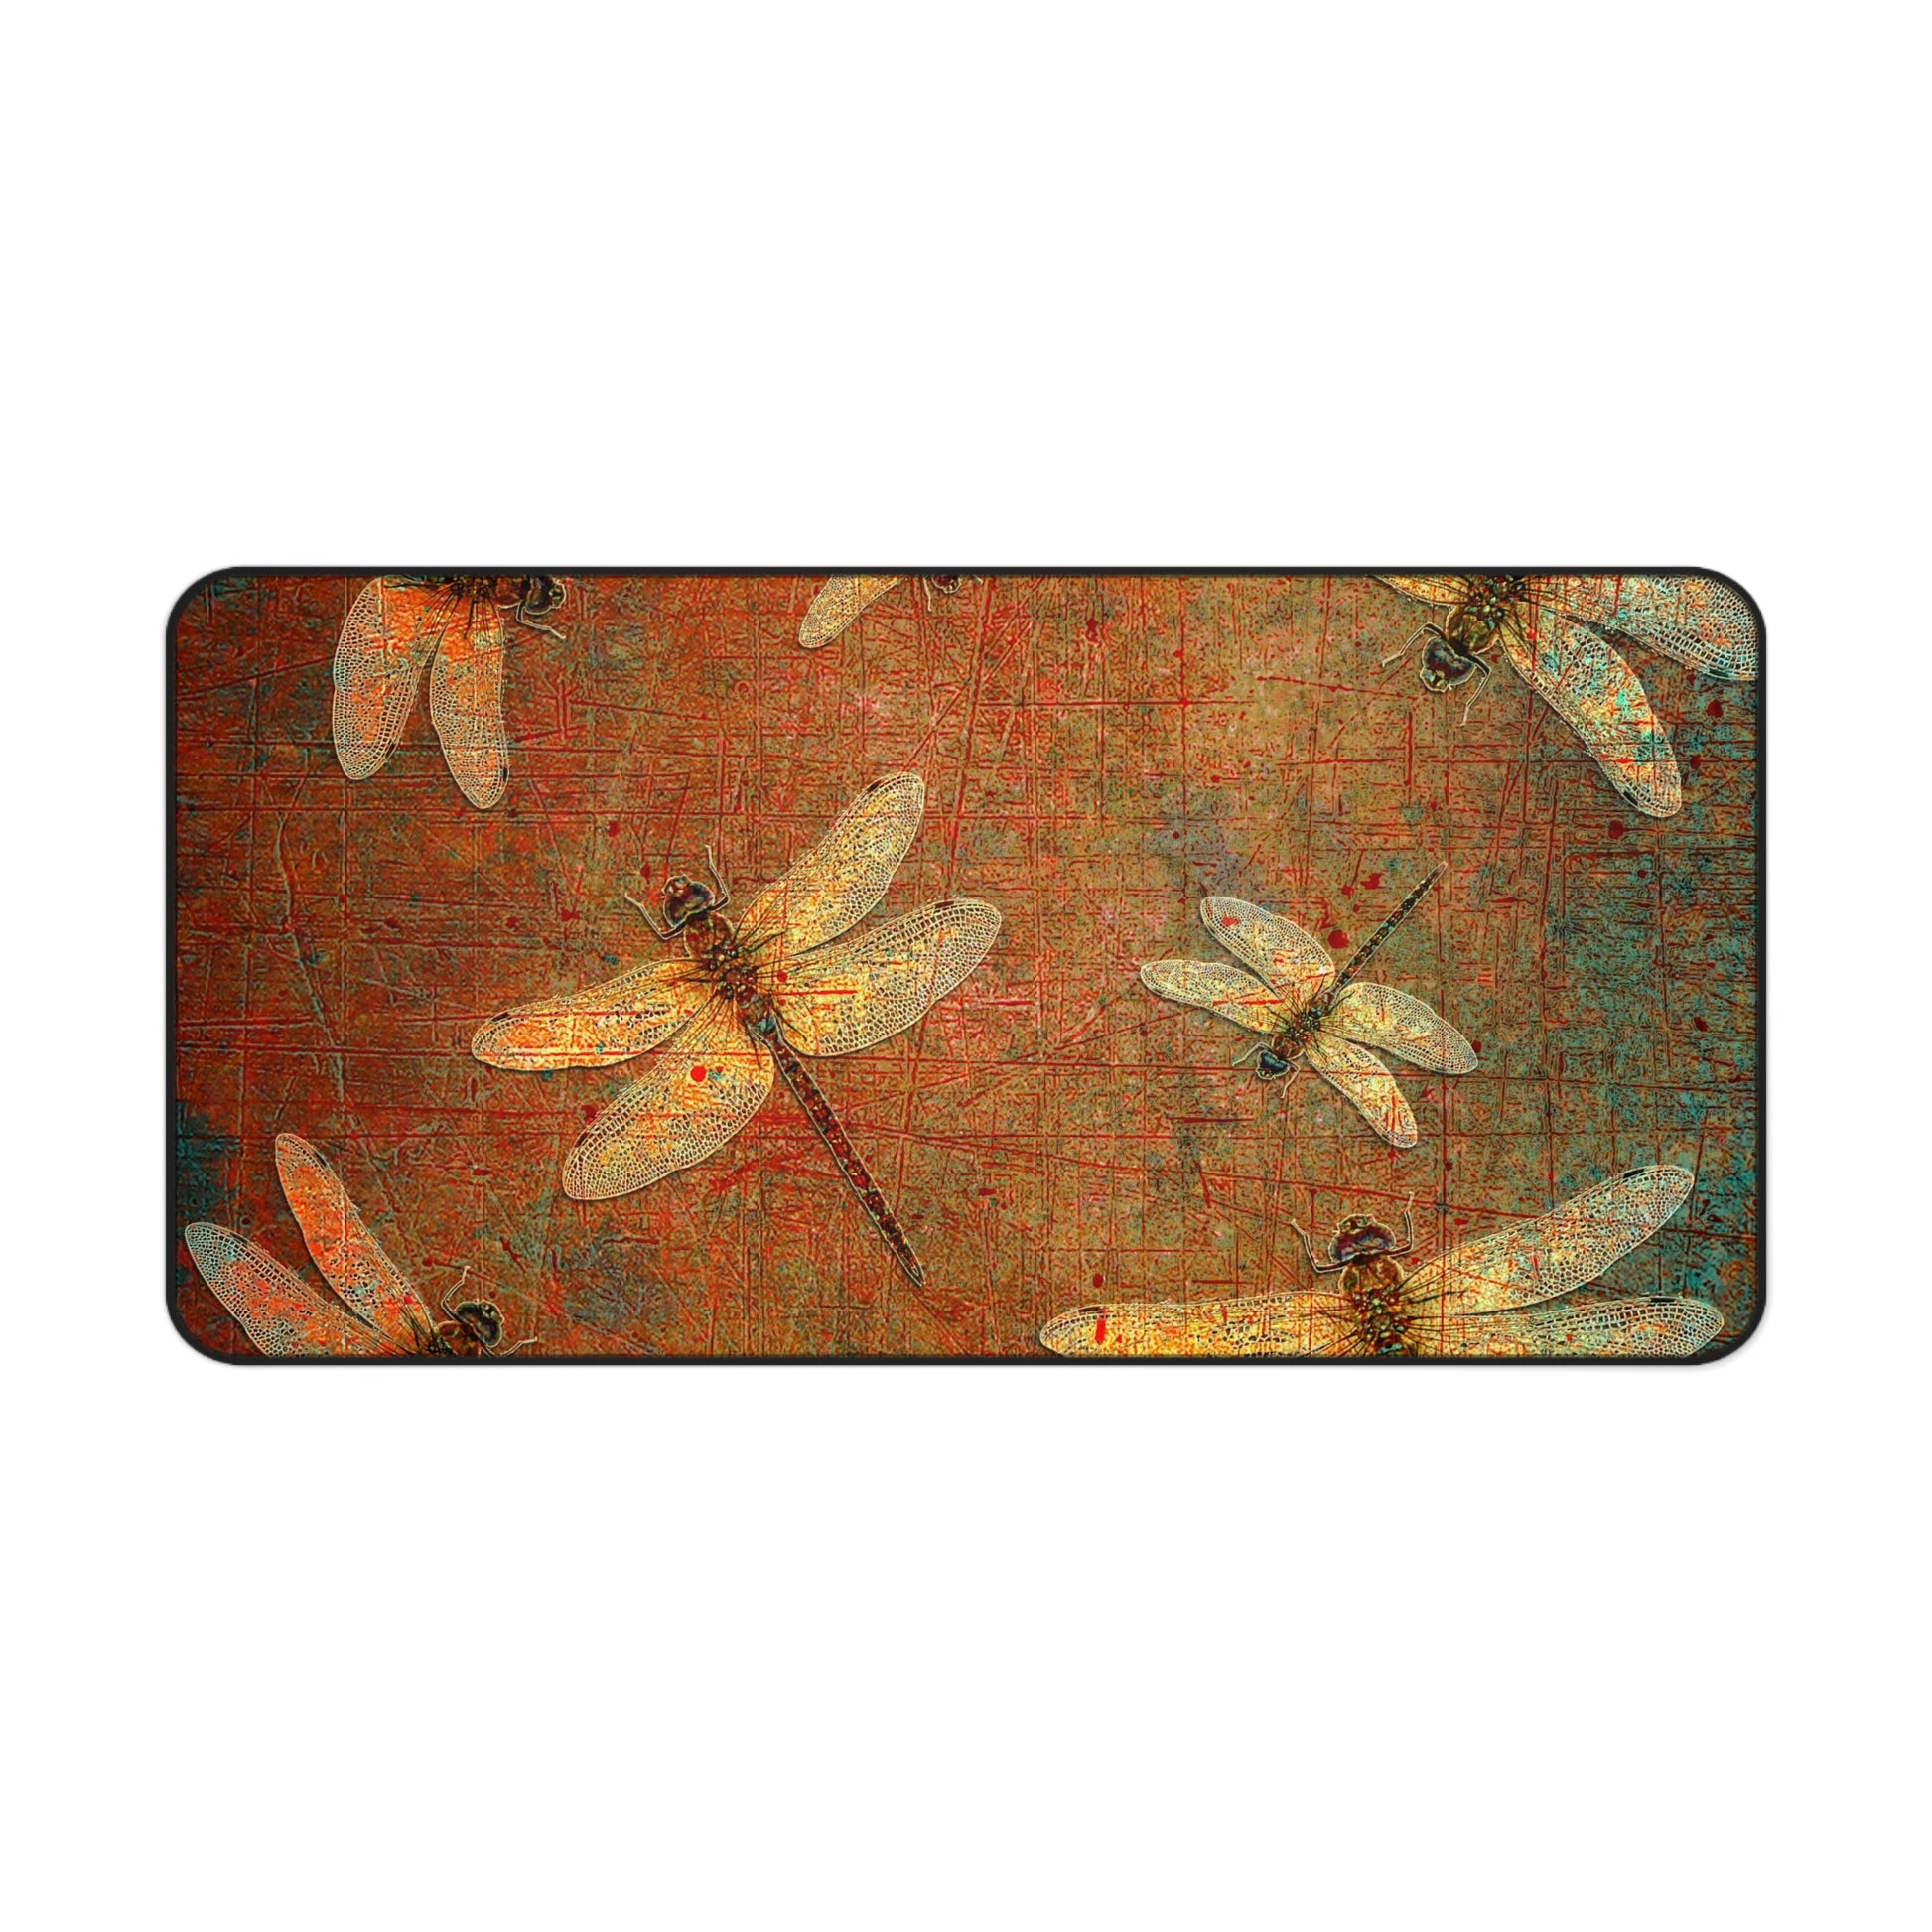 Dragonfly Desk Mat - Flight of Dragonflies on Brown and Orange Background 15.5x31